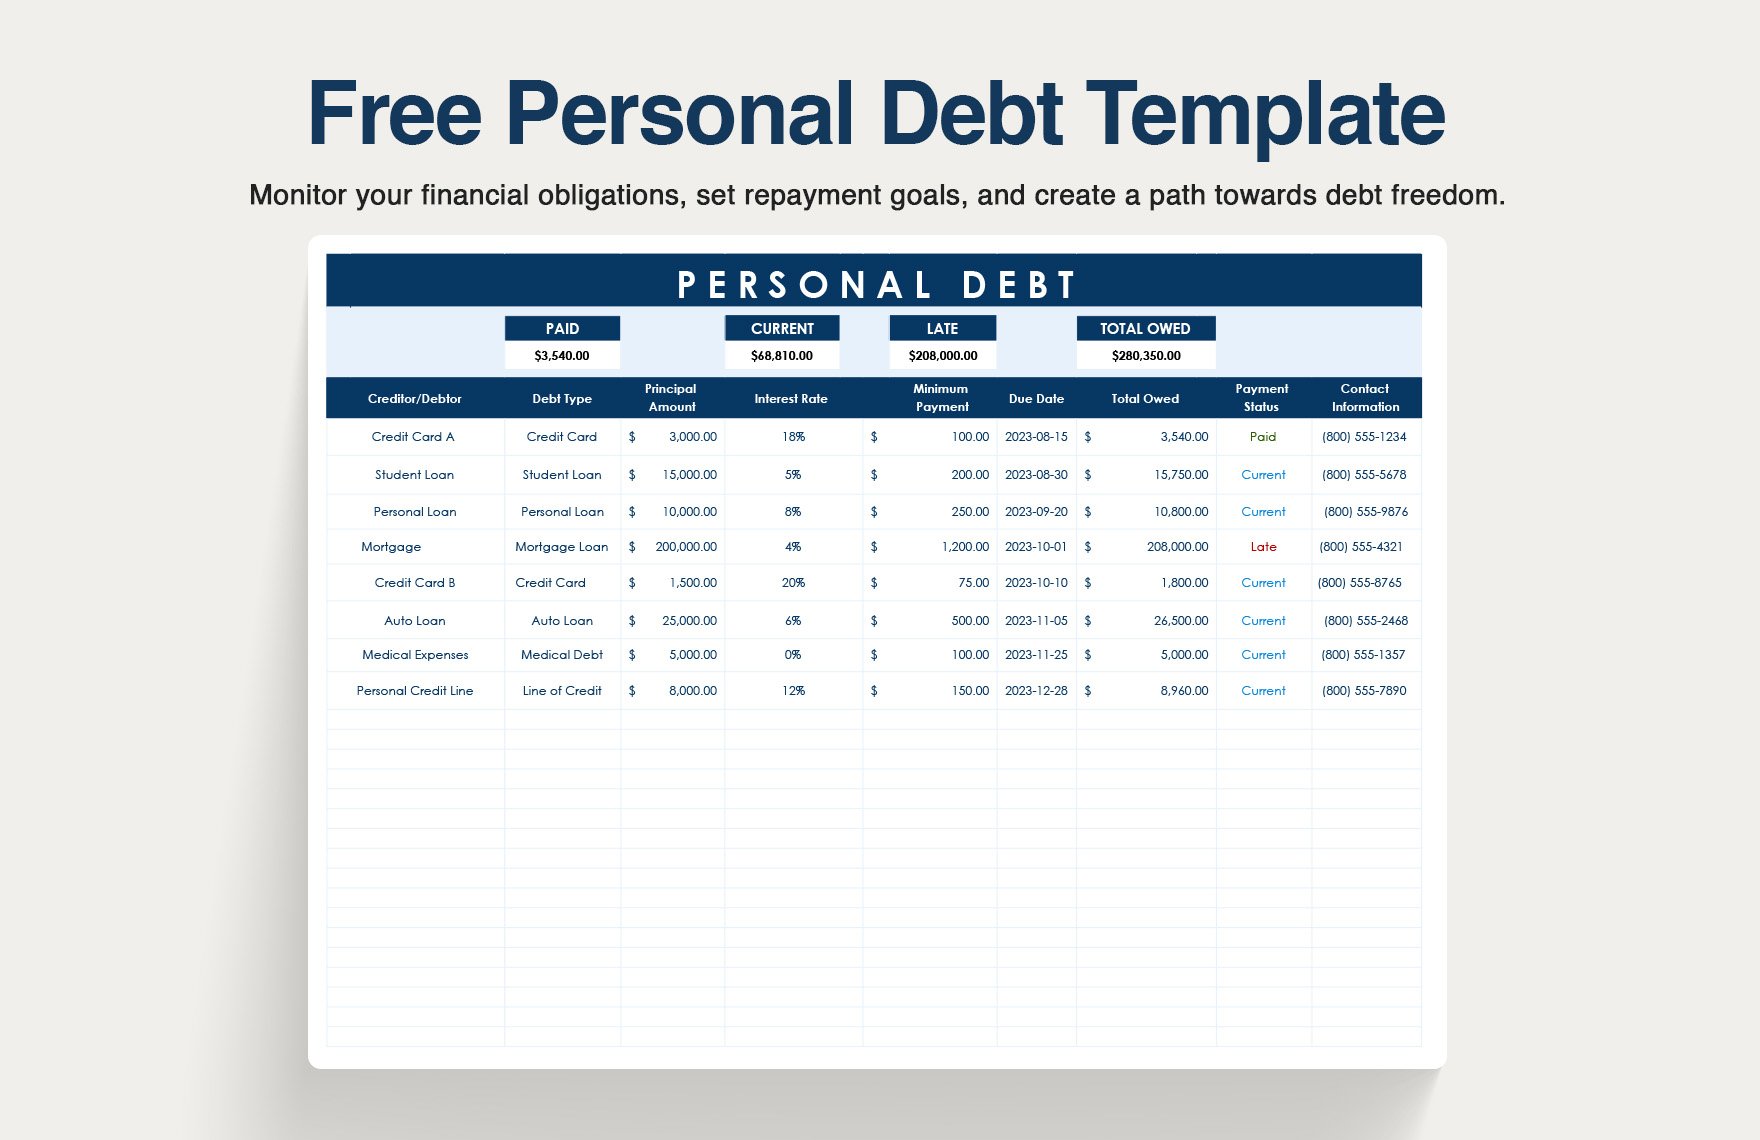 Free Personal Debt Template